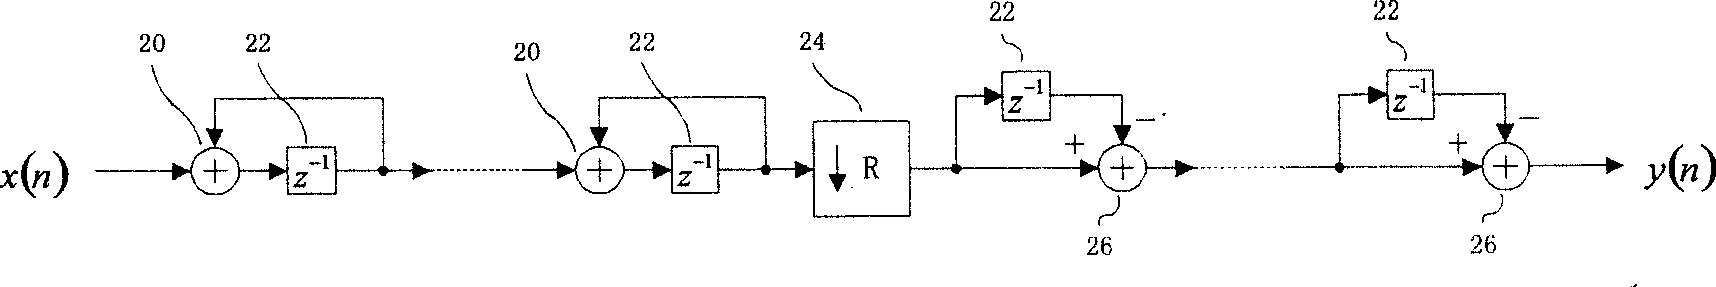 Multi-channel multiplexing cascade integrating comb filter